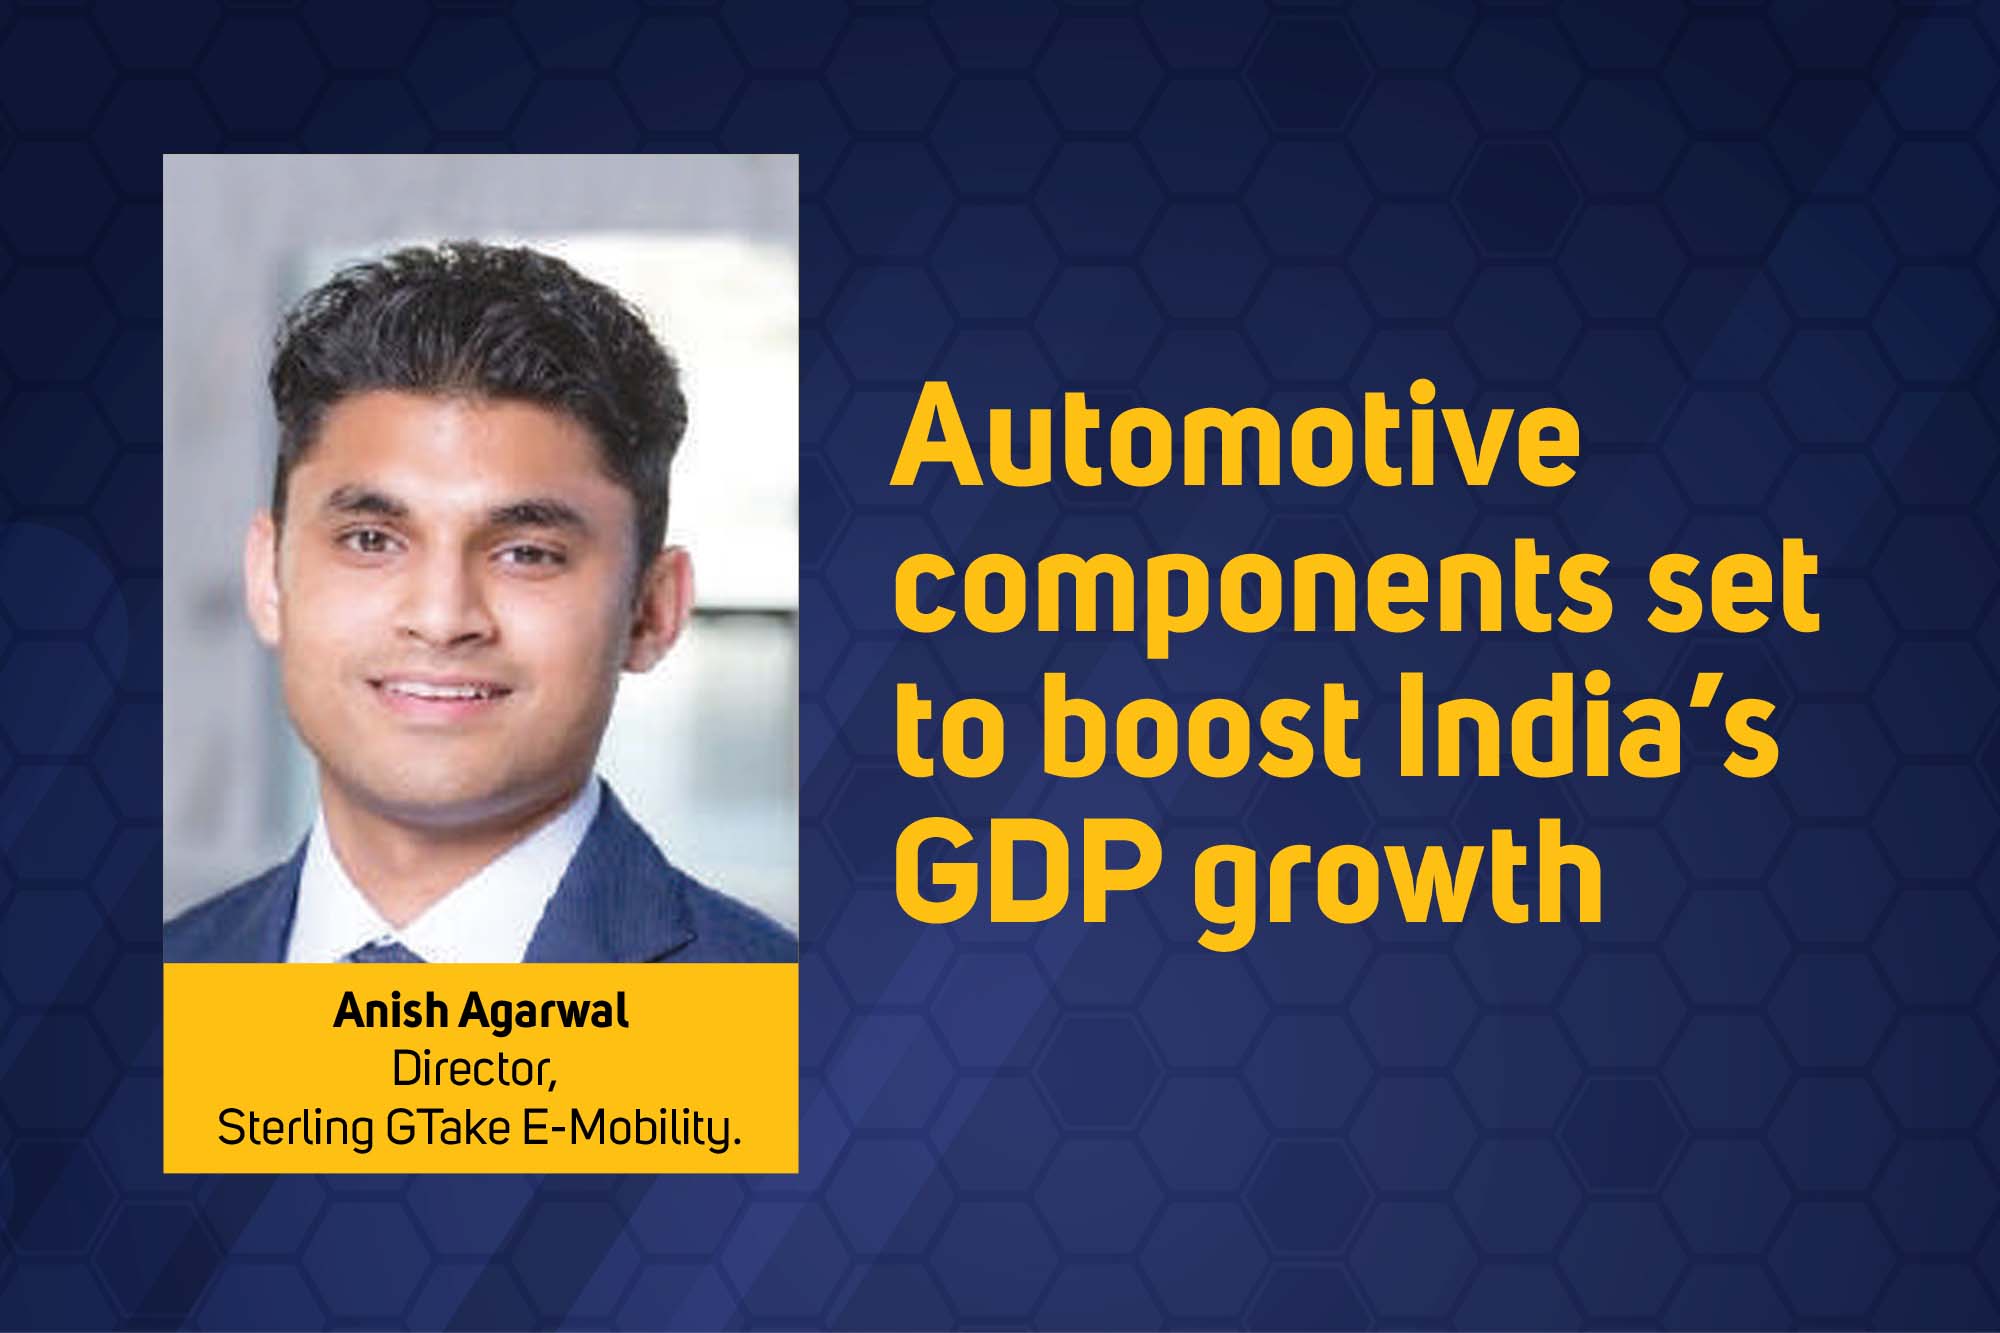 Automotive components set to boost India’s GDP growth 